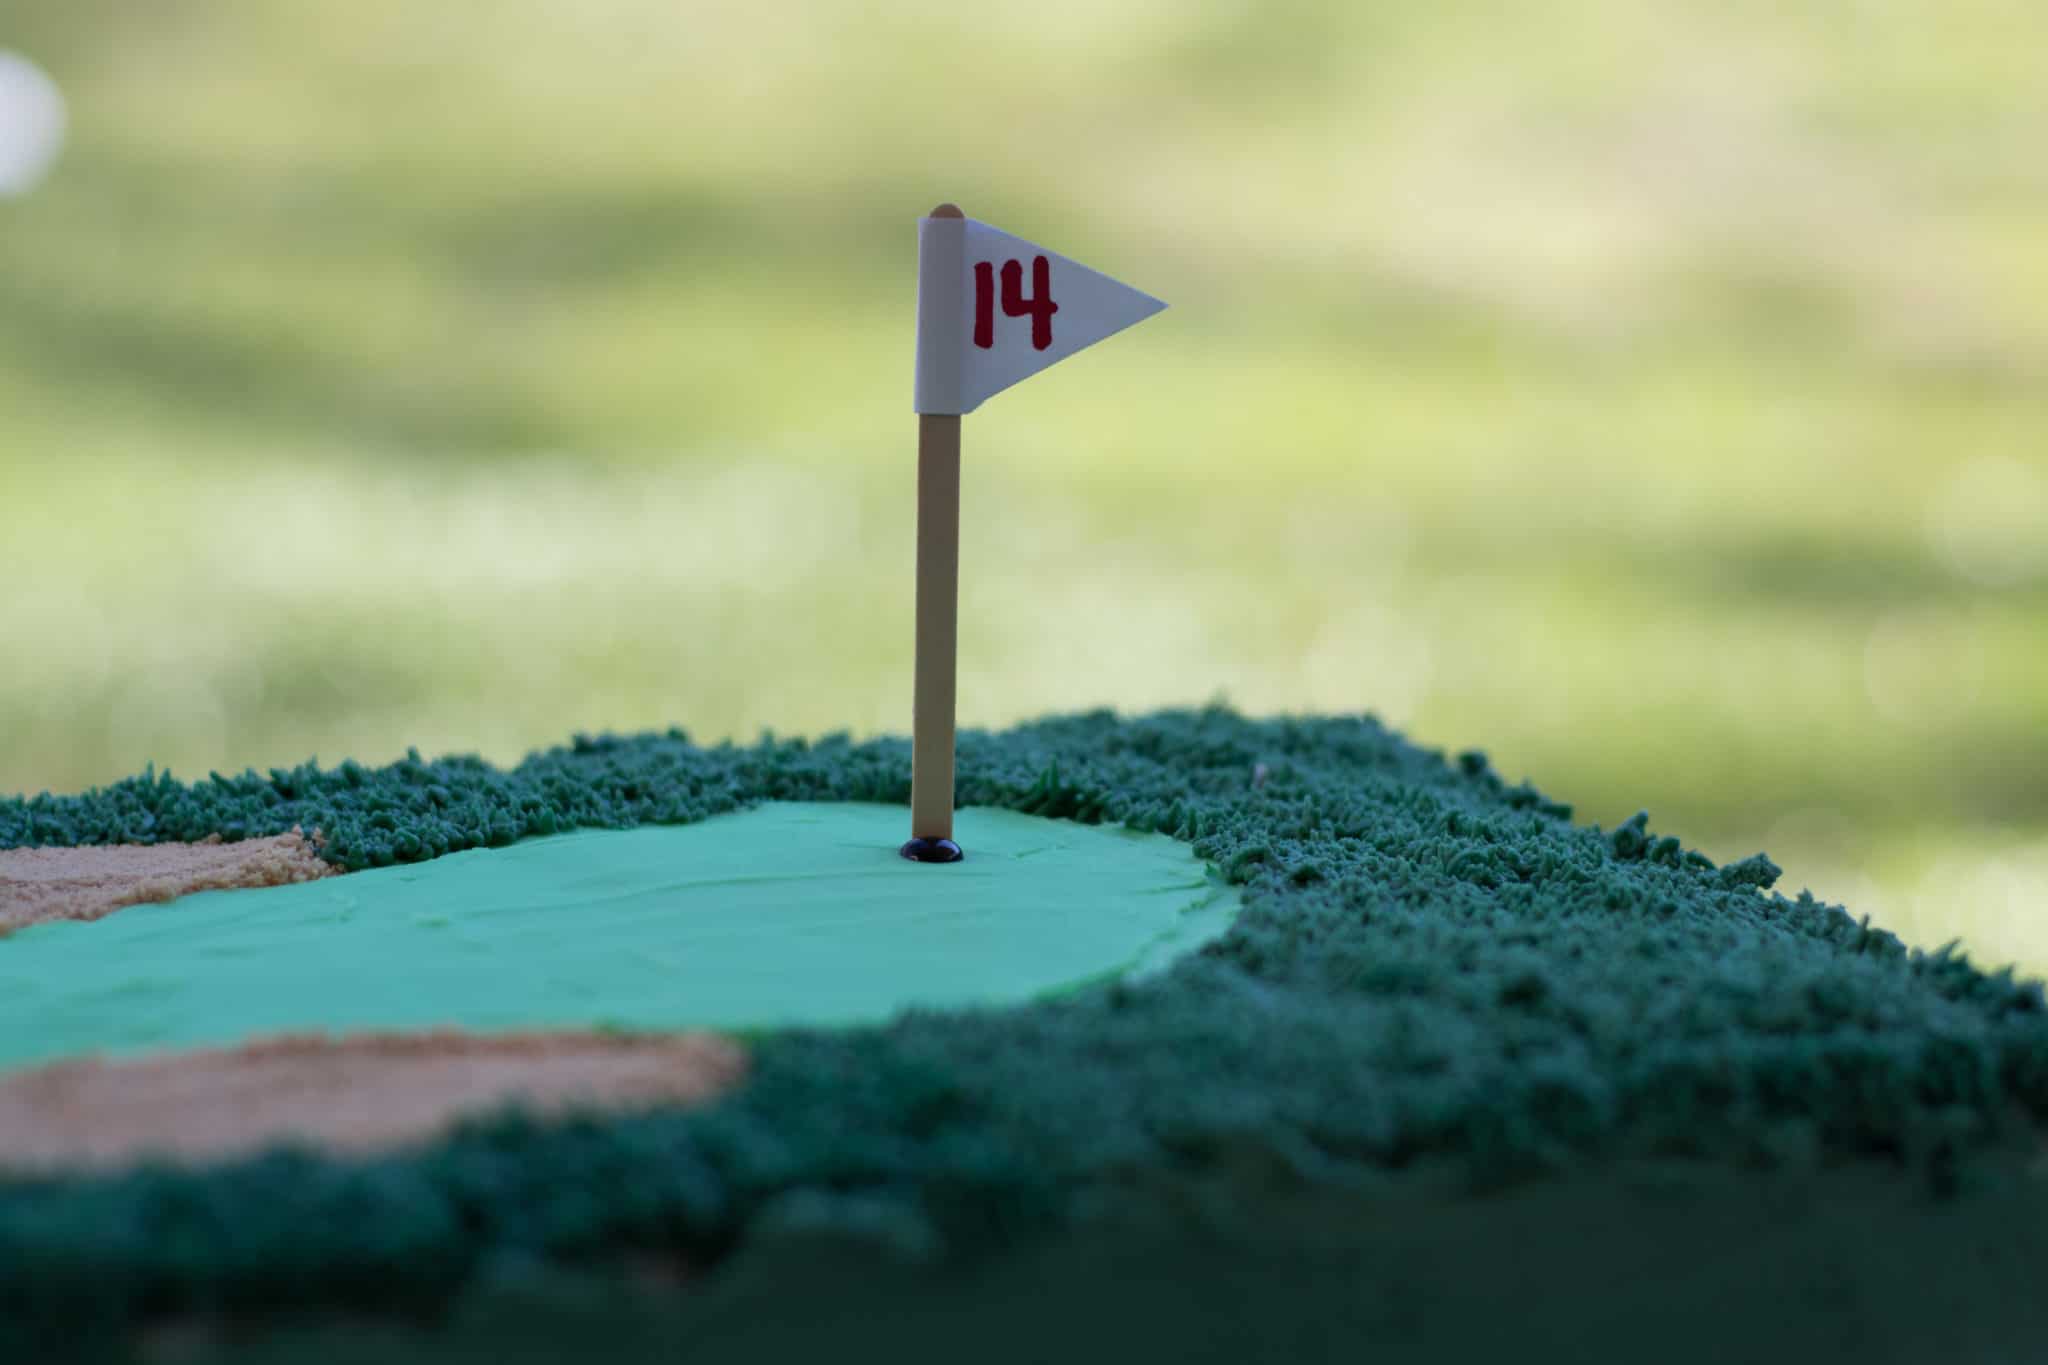 14th hole on the golf course birthday cake